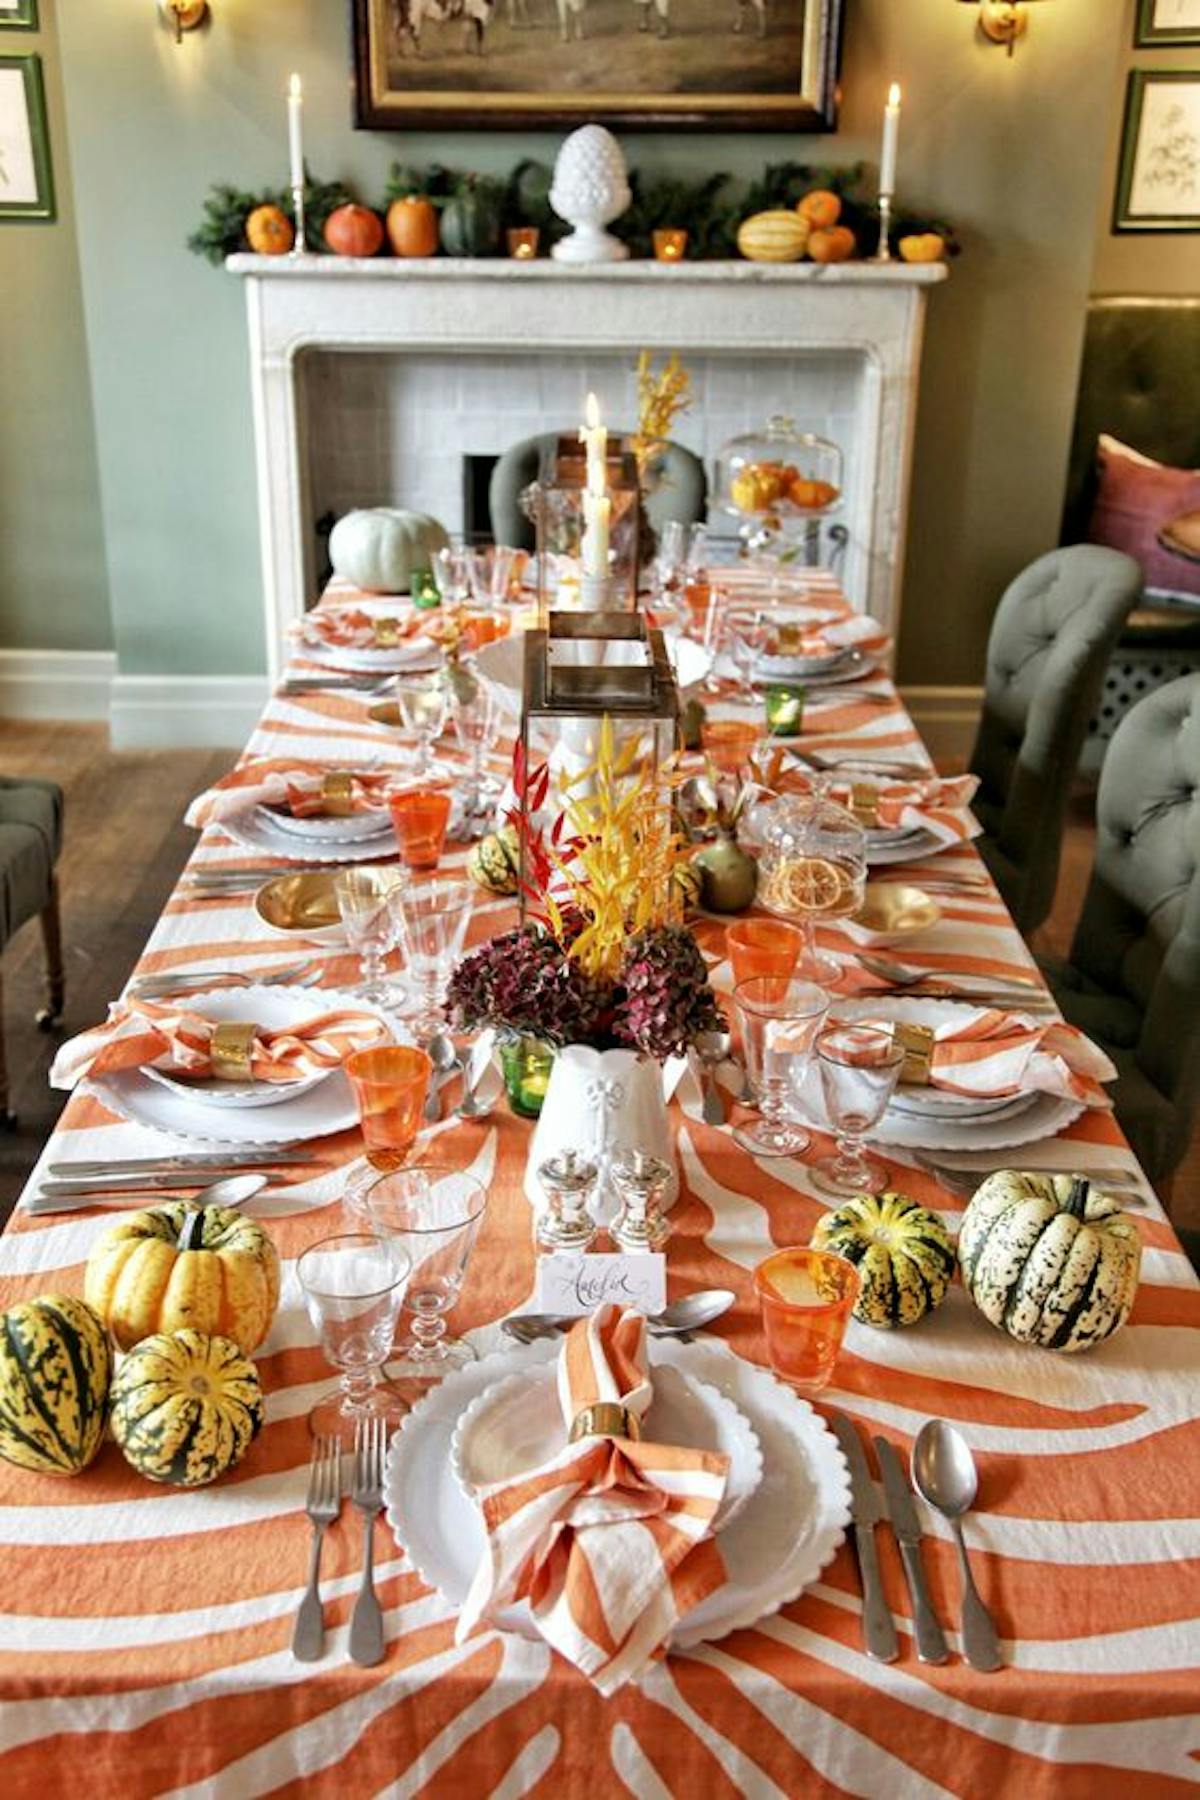  Brightly colored Thanksgiving table setting